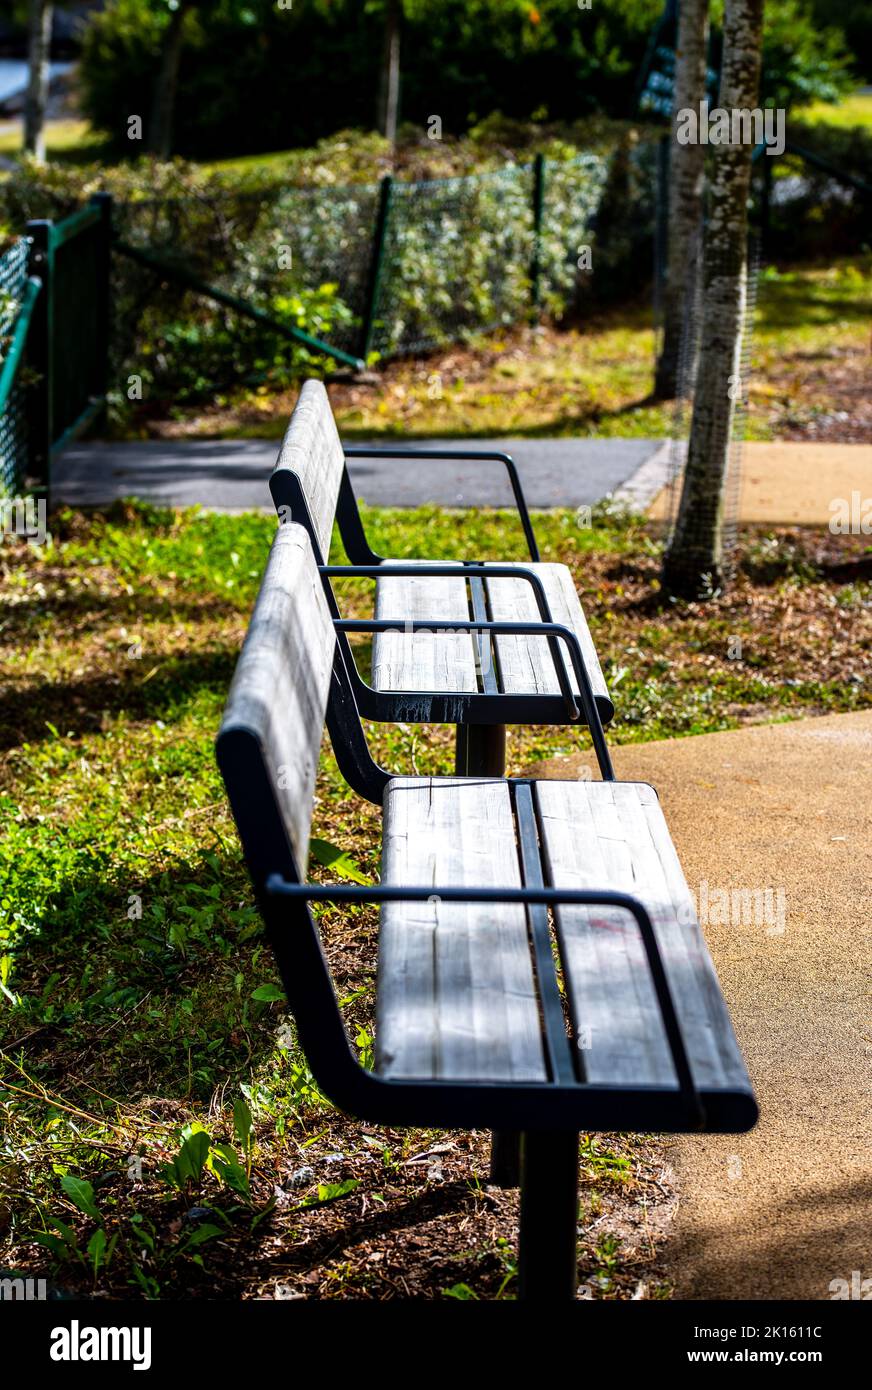 two empty benches in a park in the setting sun Stock Photo